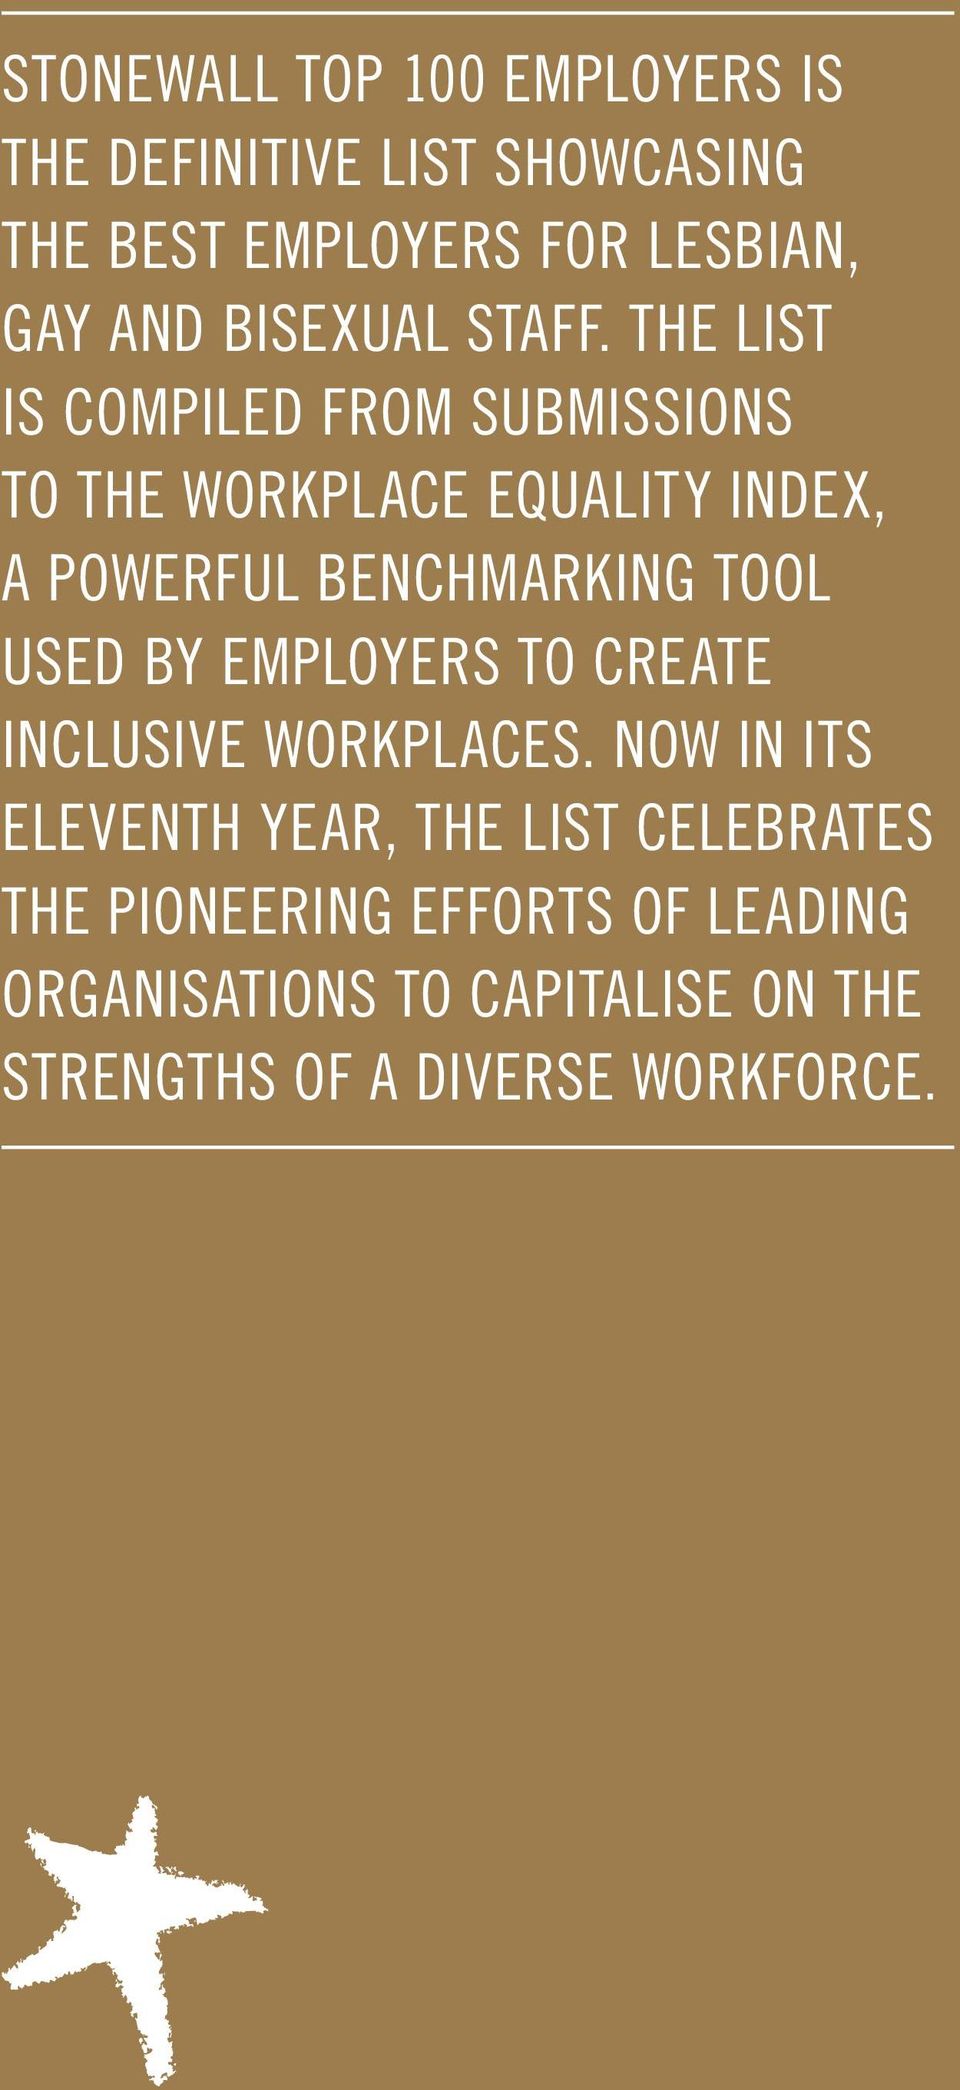 THE LIST IS COMPILED FROM SUBMISSIONS TO THE WORKPLACE EQUALITY INDEX, A POWERFUL BENCHMARKING TOOL USED BY